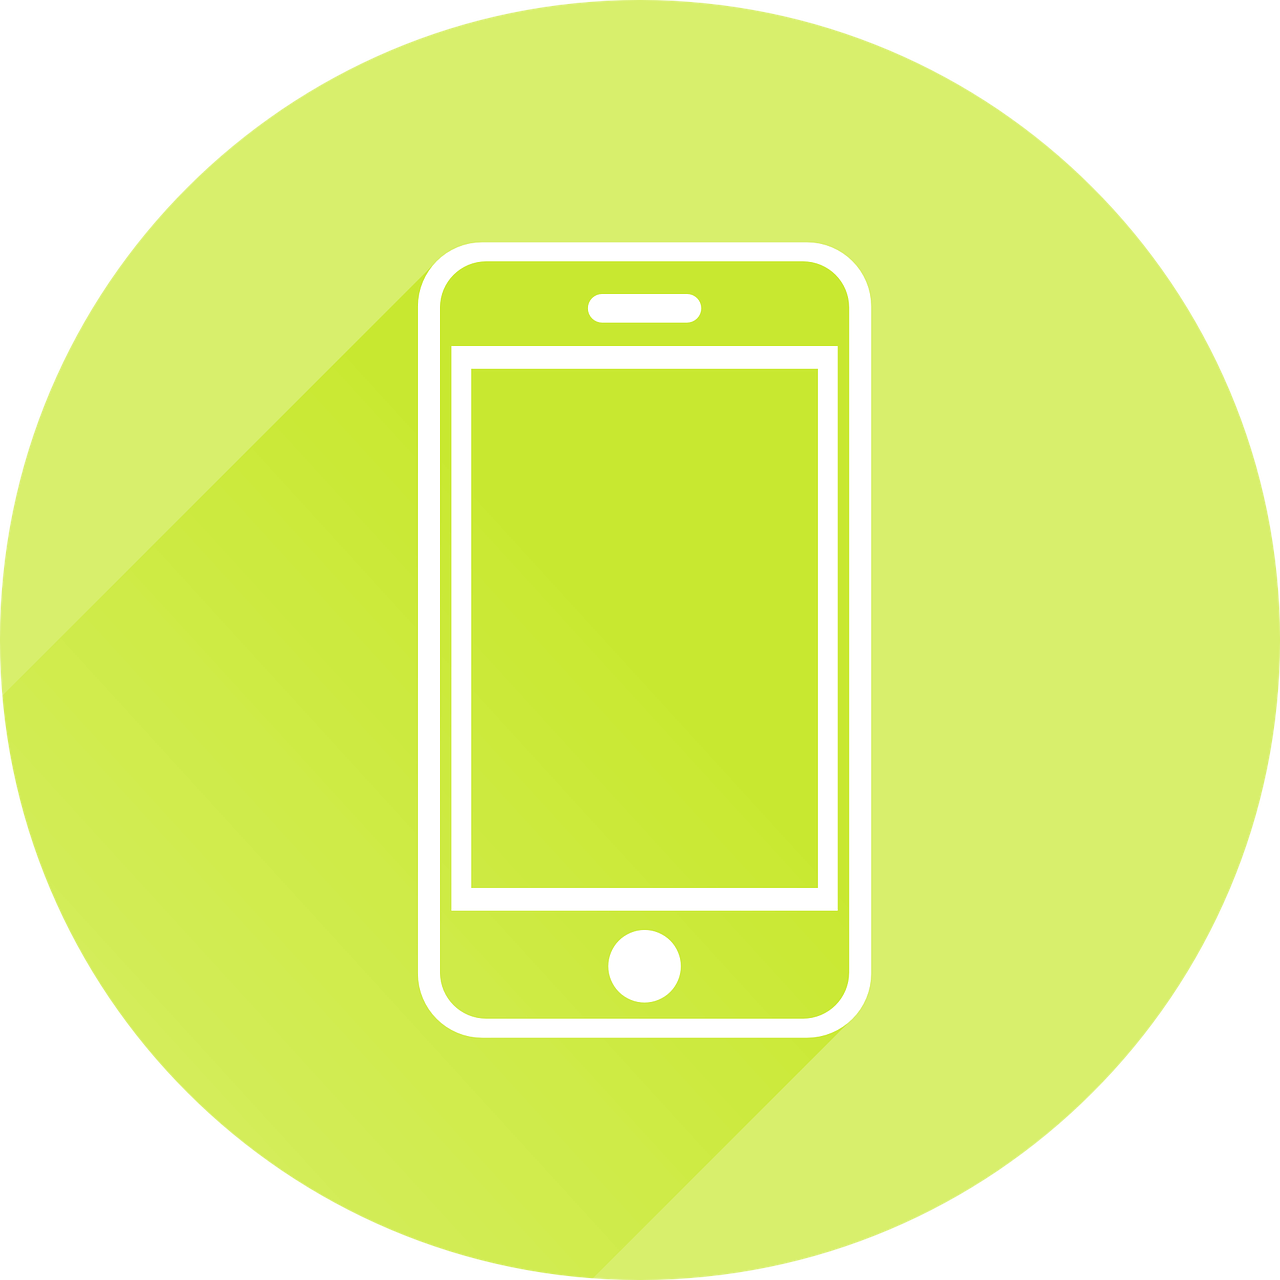 Green circle with a smartphone icon